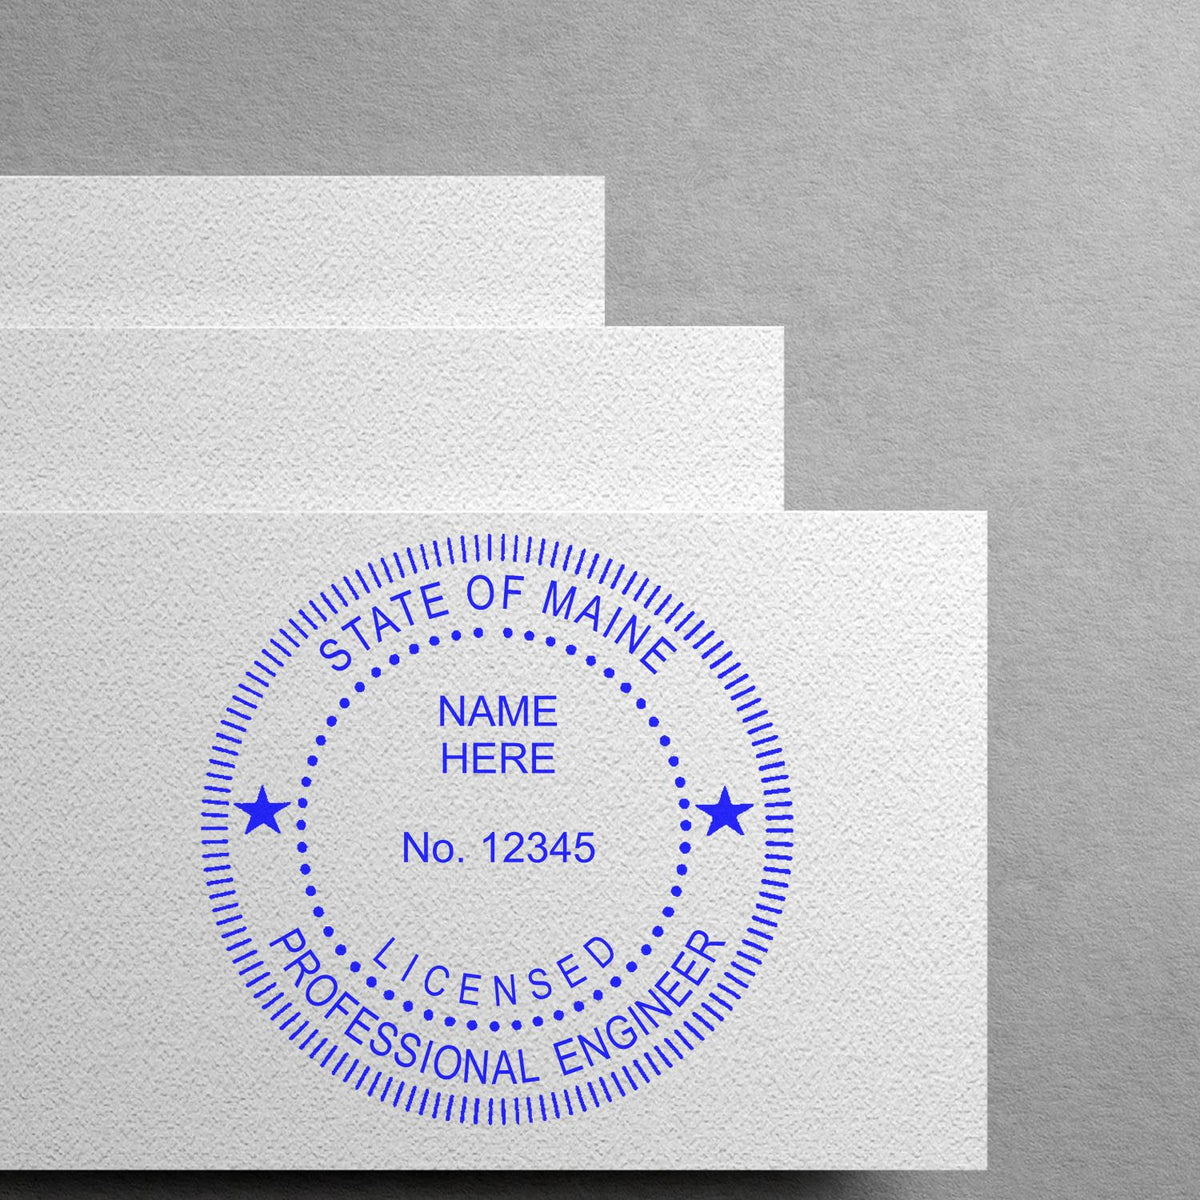 An alternative view of the Maine Professional Engineer Seal Stamp stamped on a sheet of paper showing the image in use